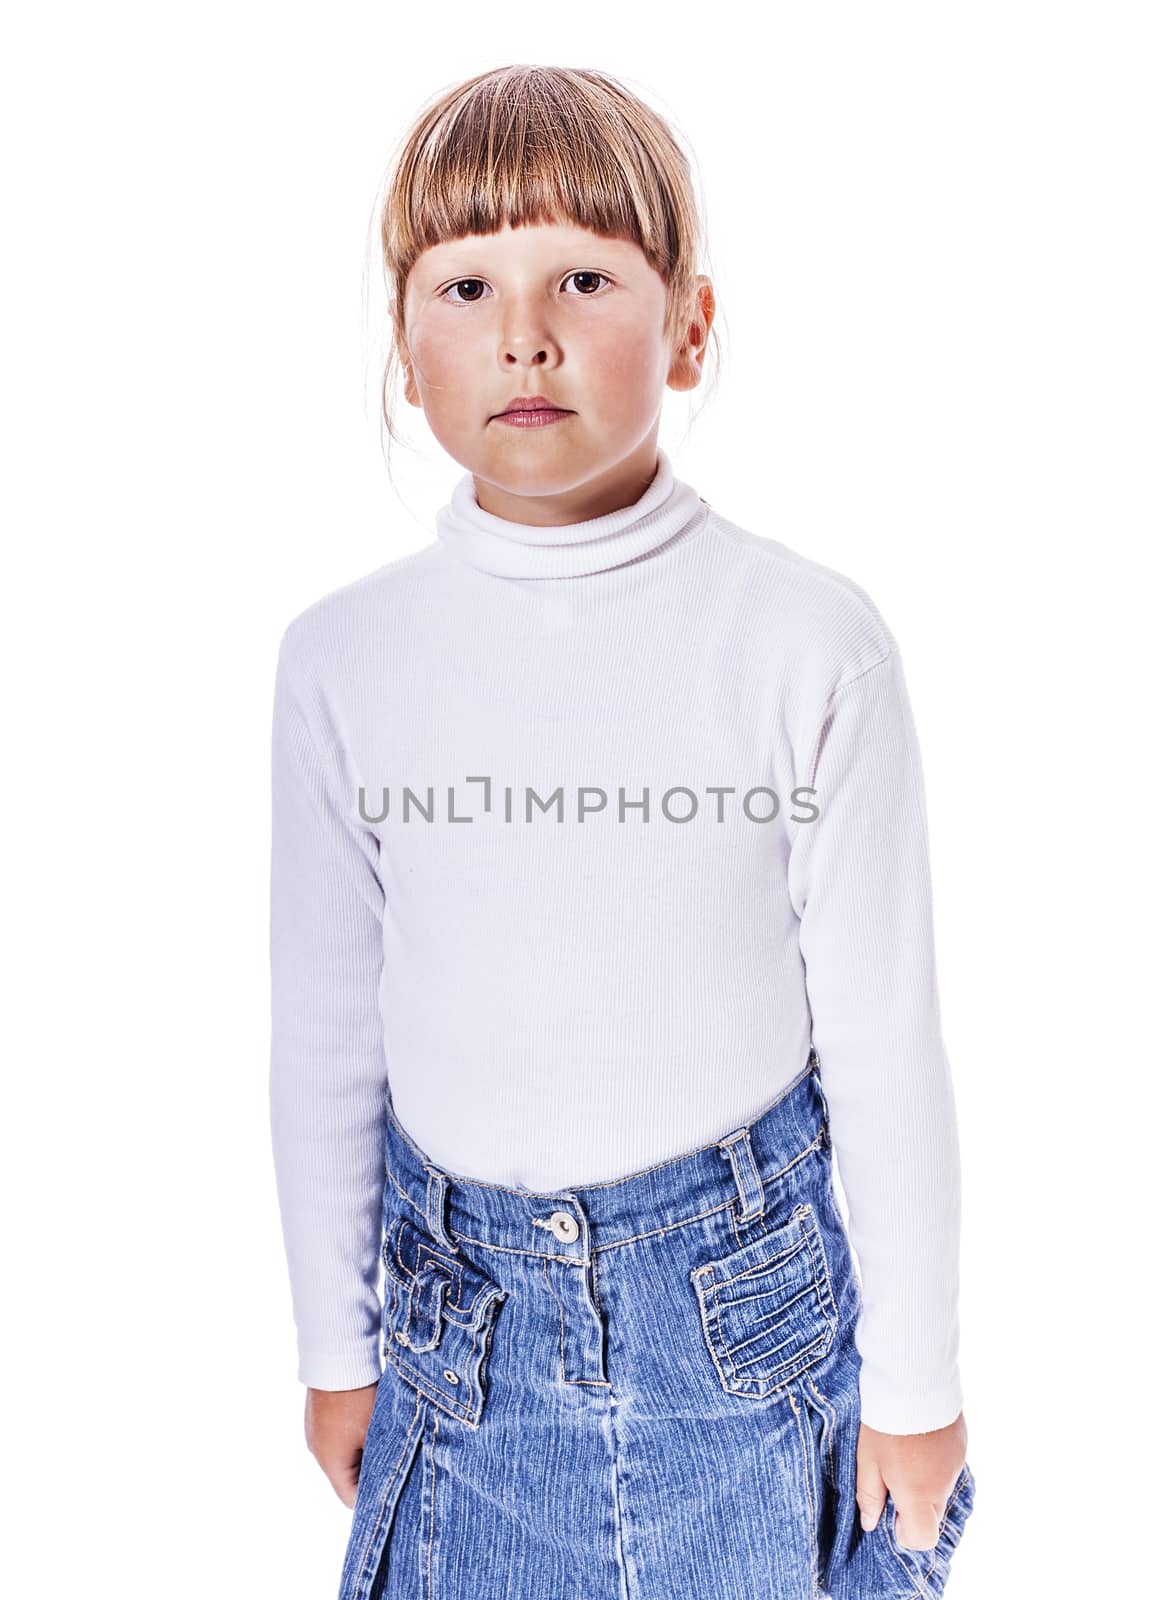 Calm serious six years girl standing isolated on white